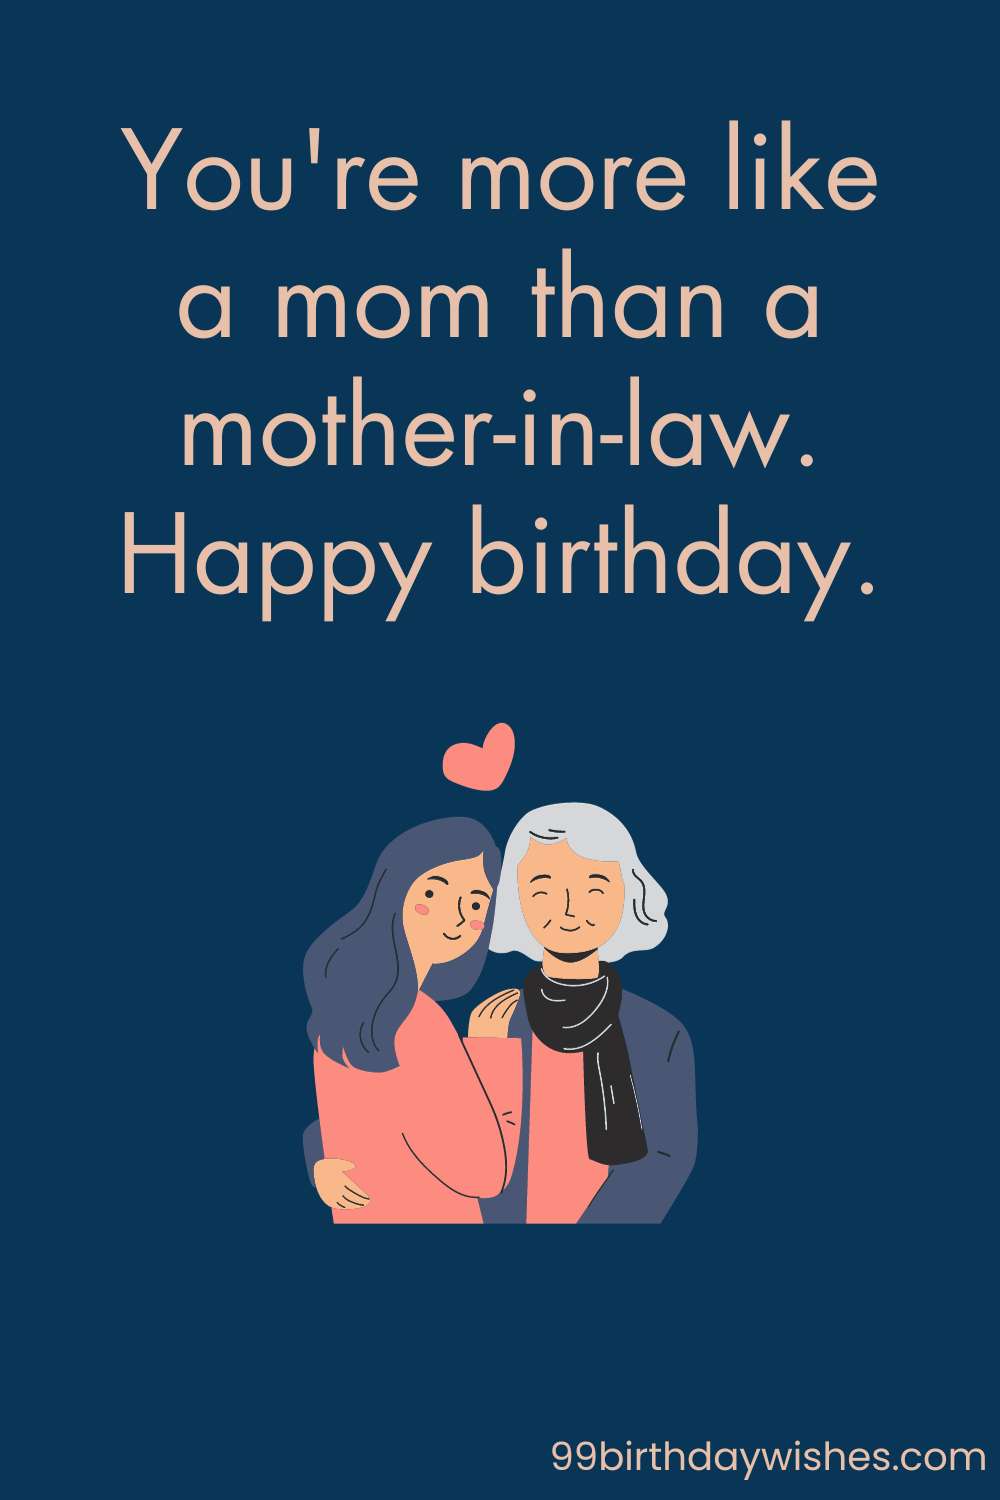 Heartfelt Birthday Wishes for Your Mother-in-Law